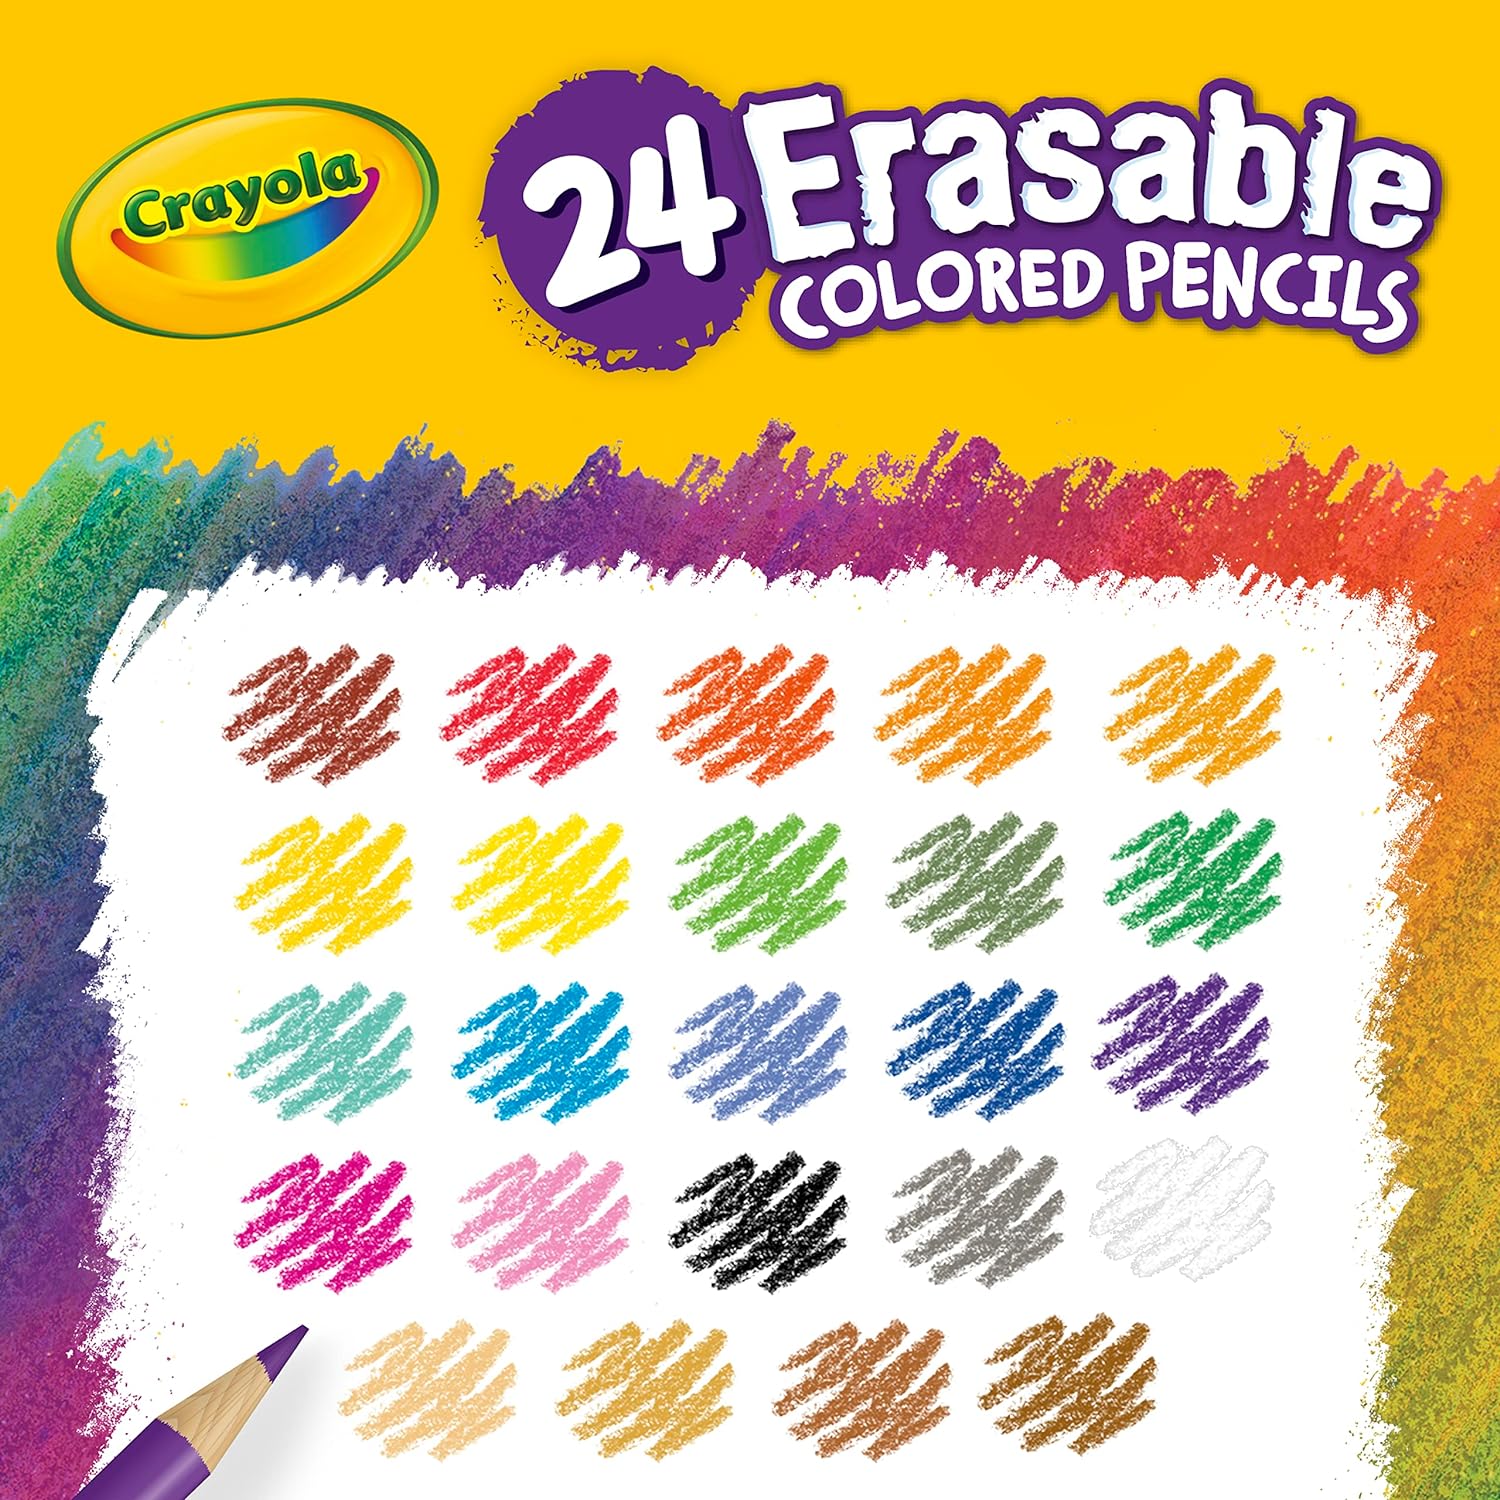 Crayola Erasable Colored Pencils, Kids At Home Activities, 24 Count, Assorted, Long